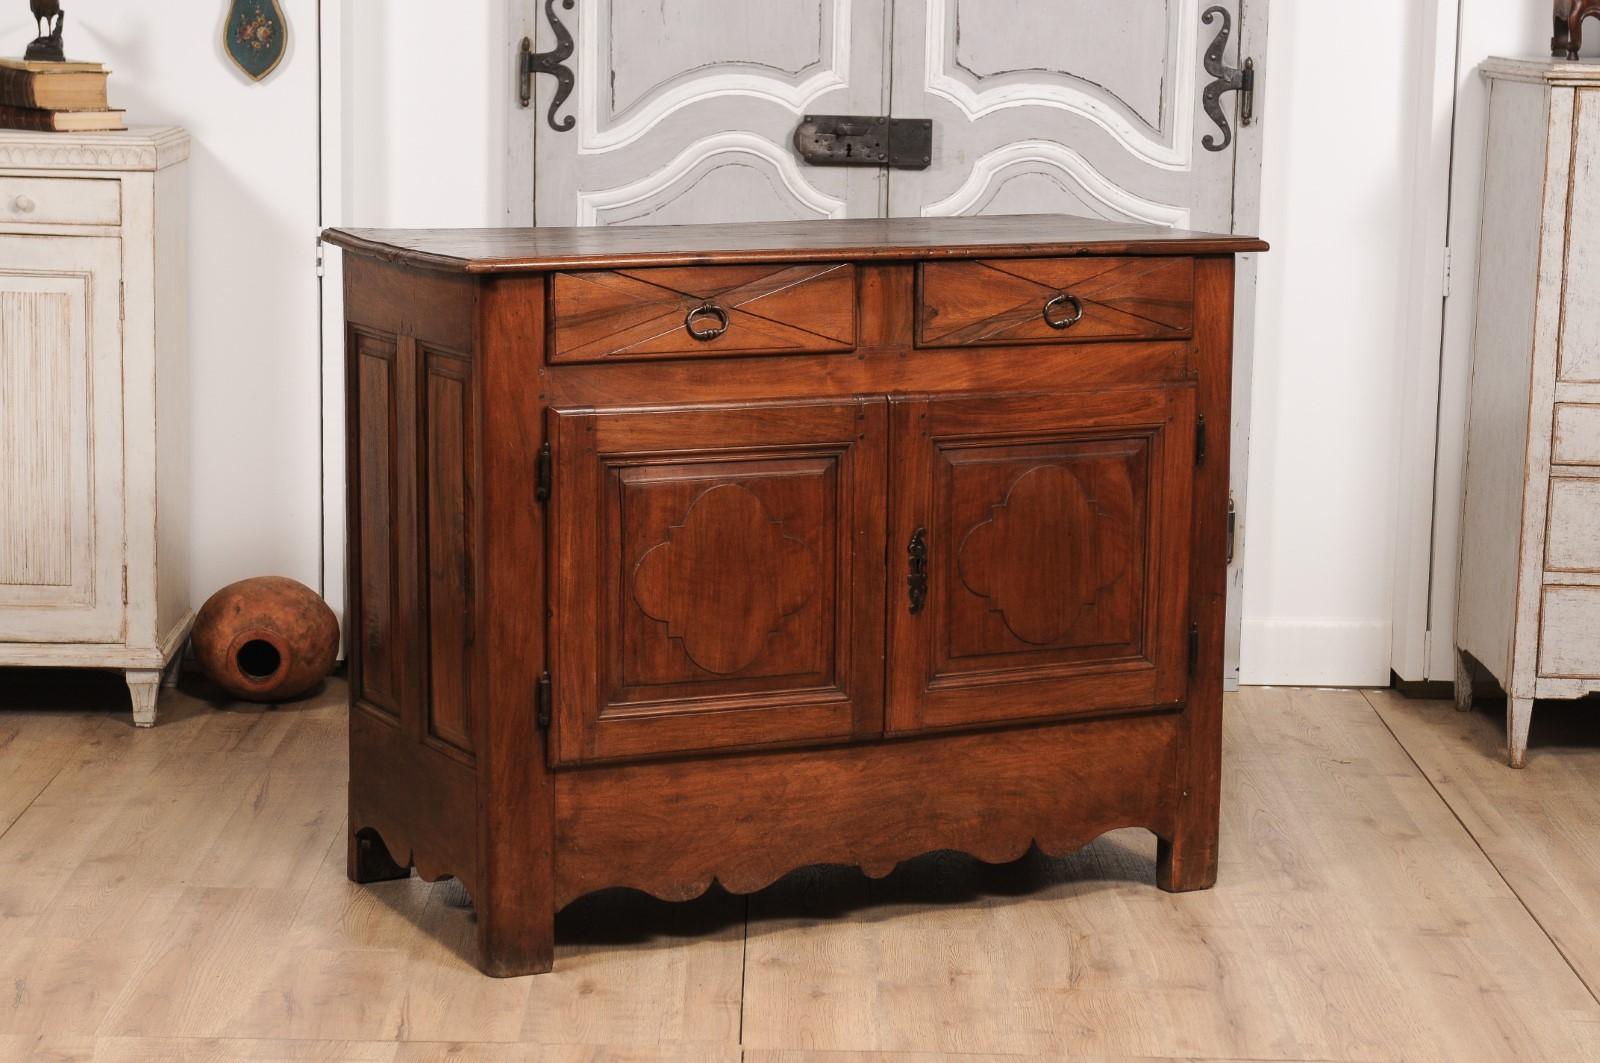 Louis XIV Period 18th Century Walnut Buffet with Carved Quatrefoil Motifs For Sale 2